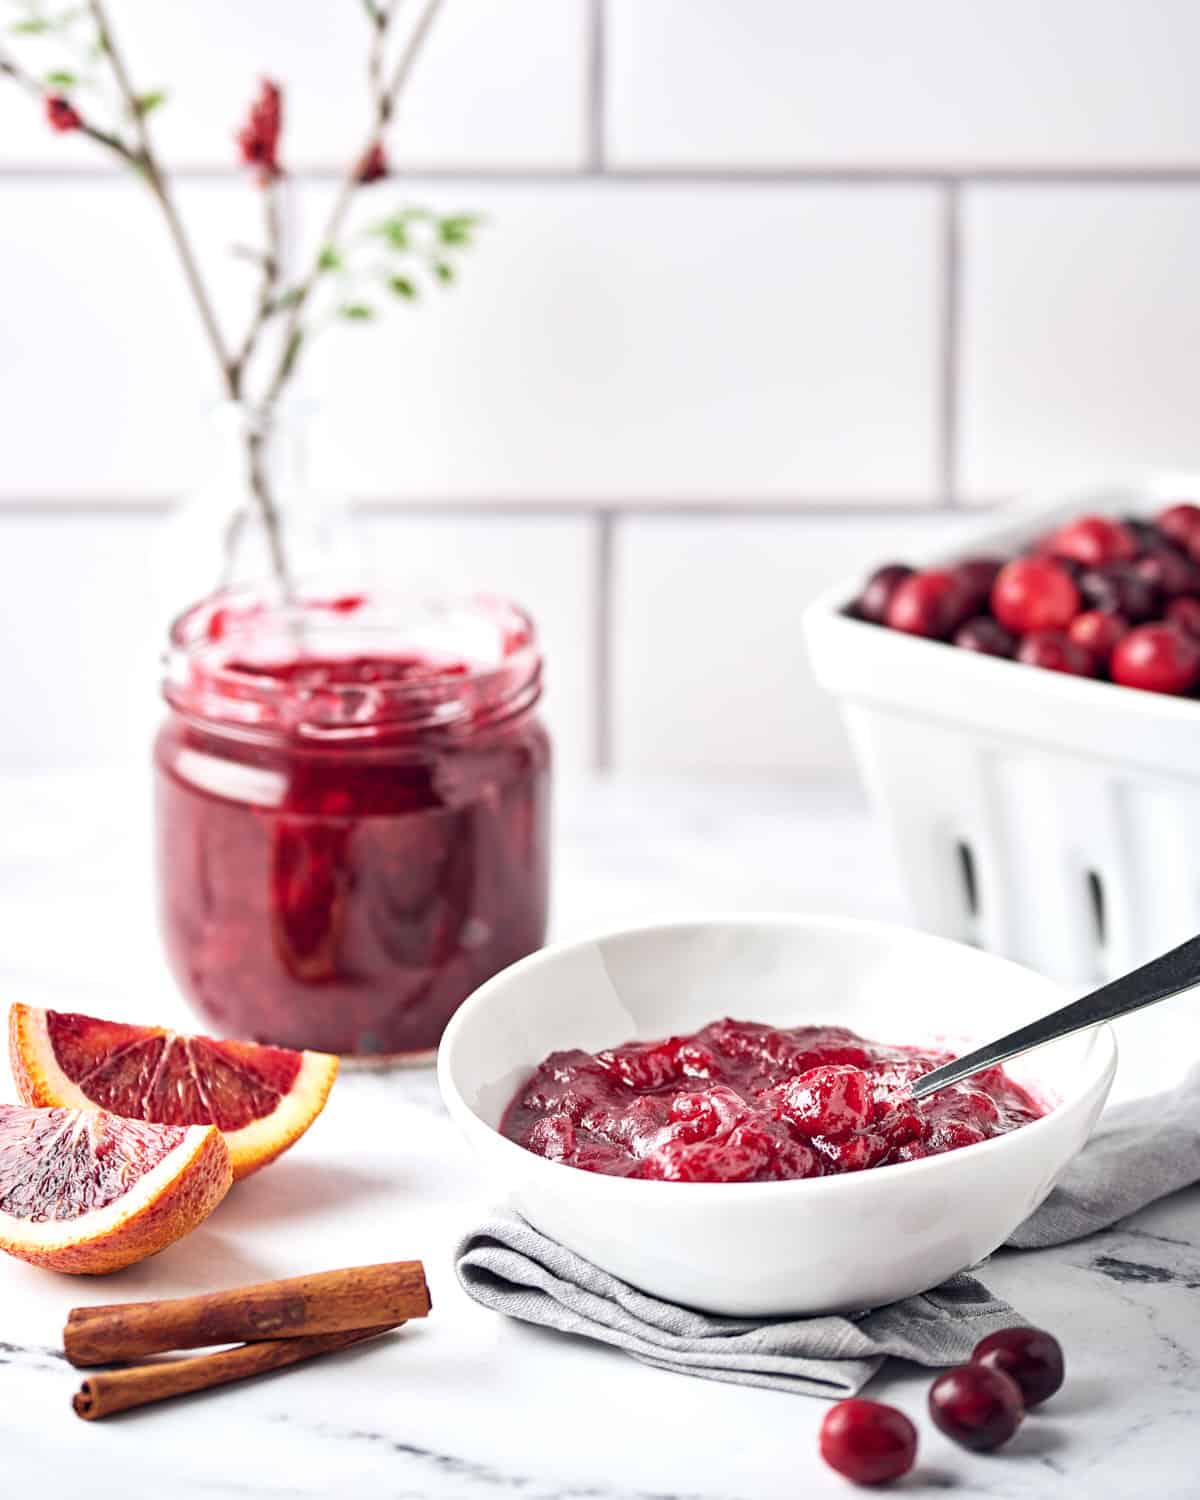 Cranberry Sauce with Orange in a white bowl on a marble surface.